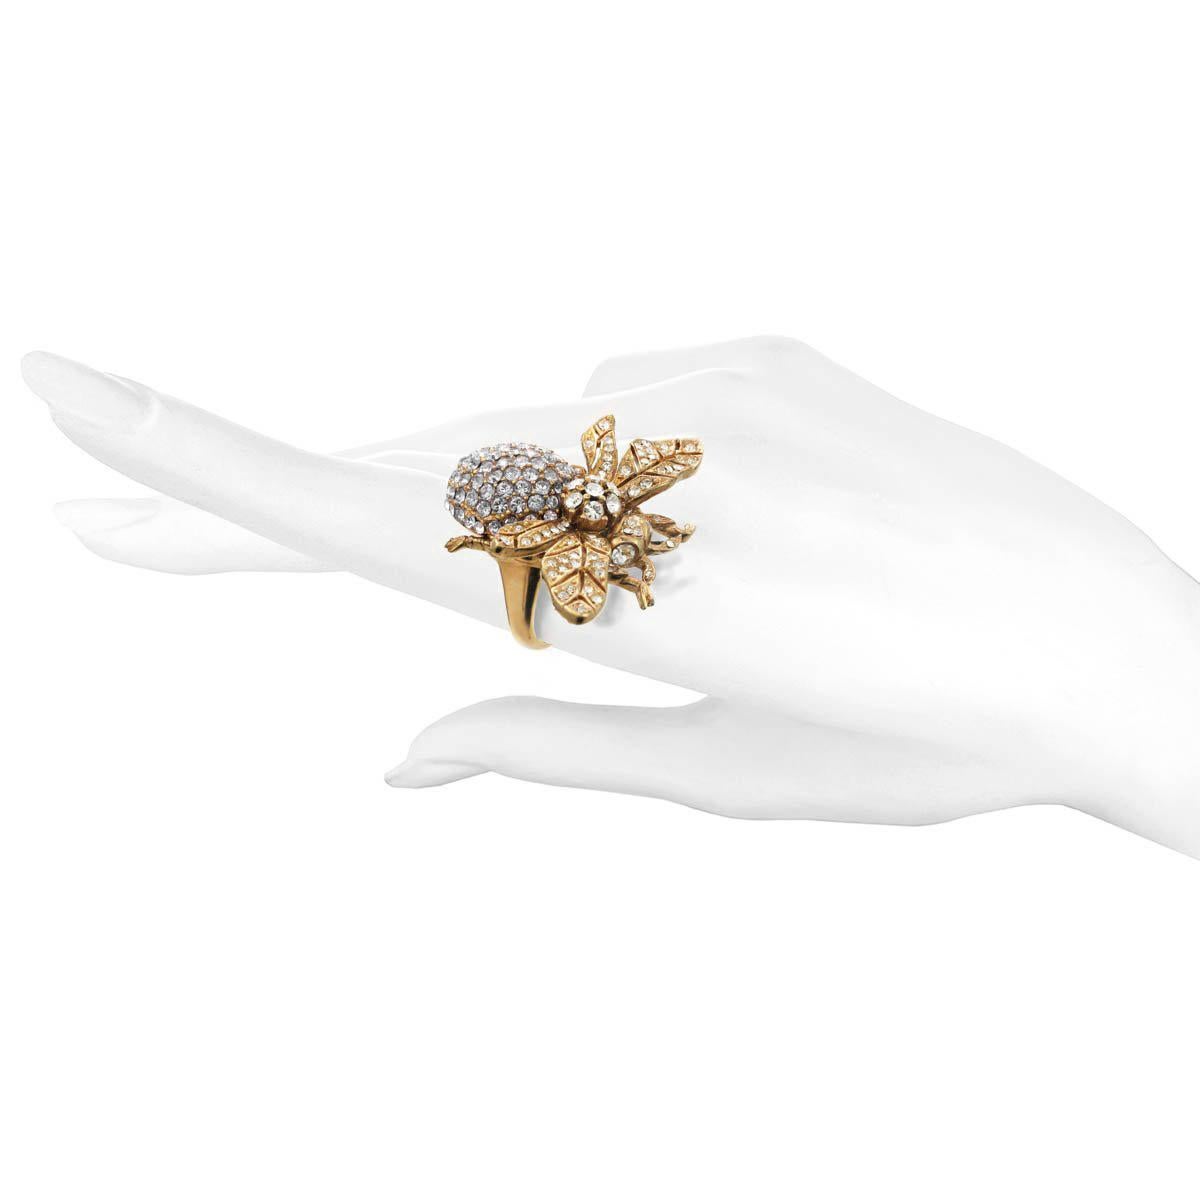 The Anniversary Bee was designed to celebrate CINER's 100th year of business and is the only CINER piece that has the year 1892 engraved in it. A must have for every CINER admirer, this ring is classically chic while maintaining a modern look and